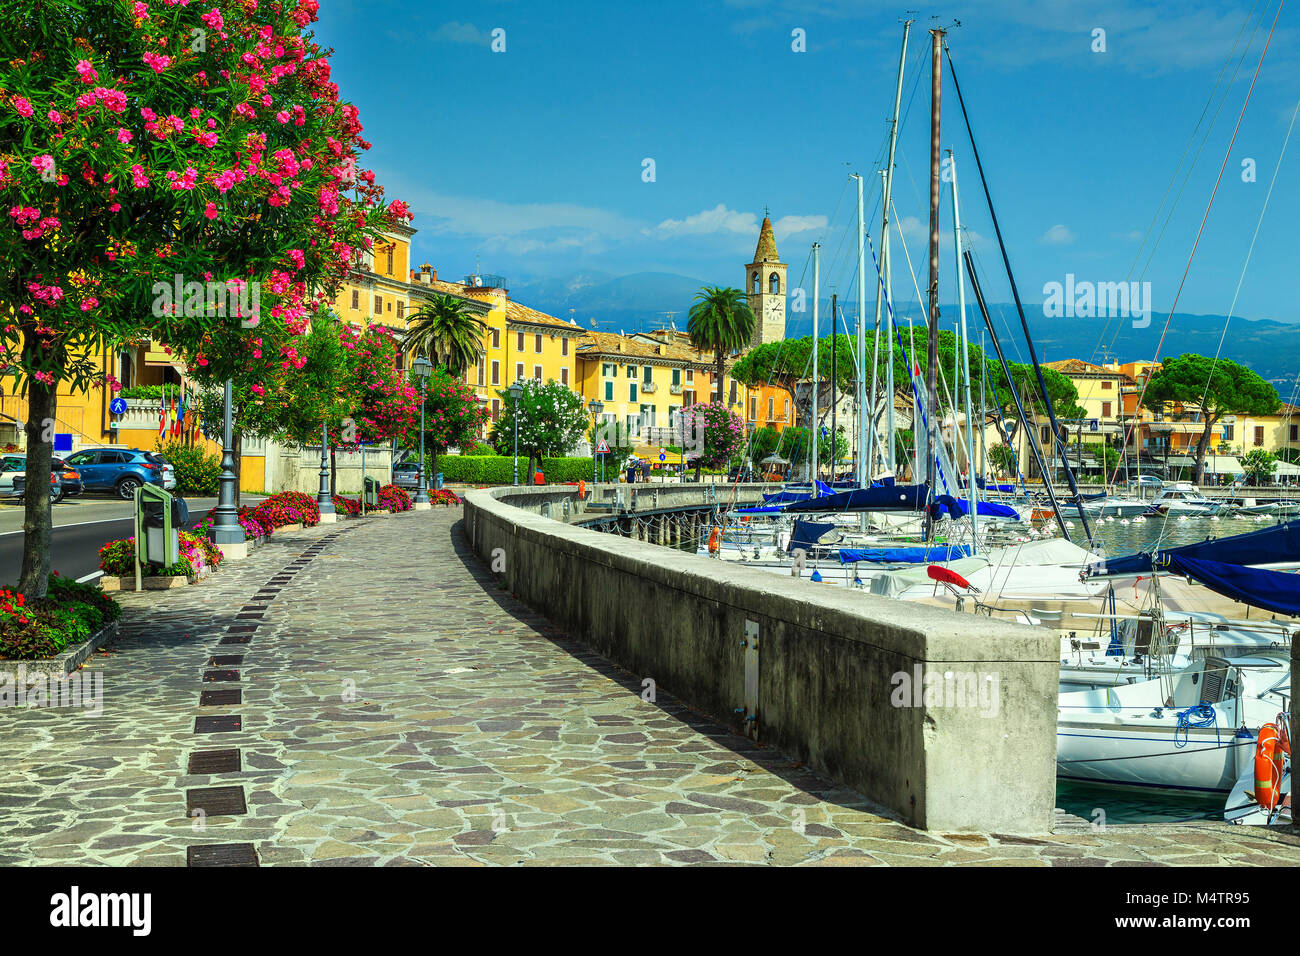 Stunning paved walkway with colorful Mediterranean flowers. Luxury yachts and boats in wonderful harbor of Toscolano-Maderno, lake Garda, Lombardy reg Stock Photo